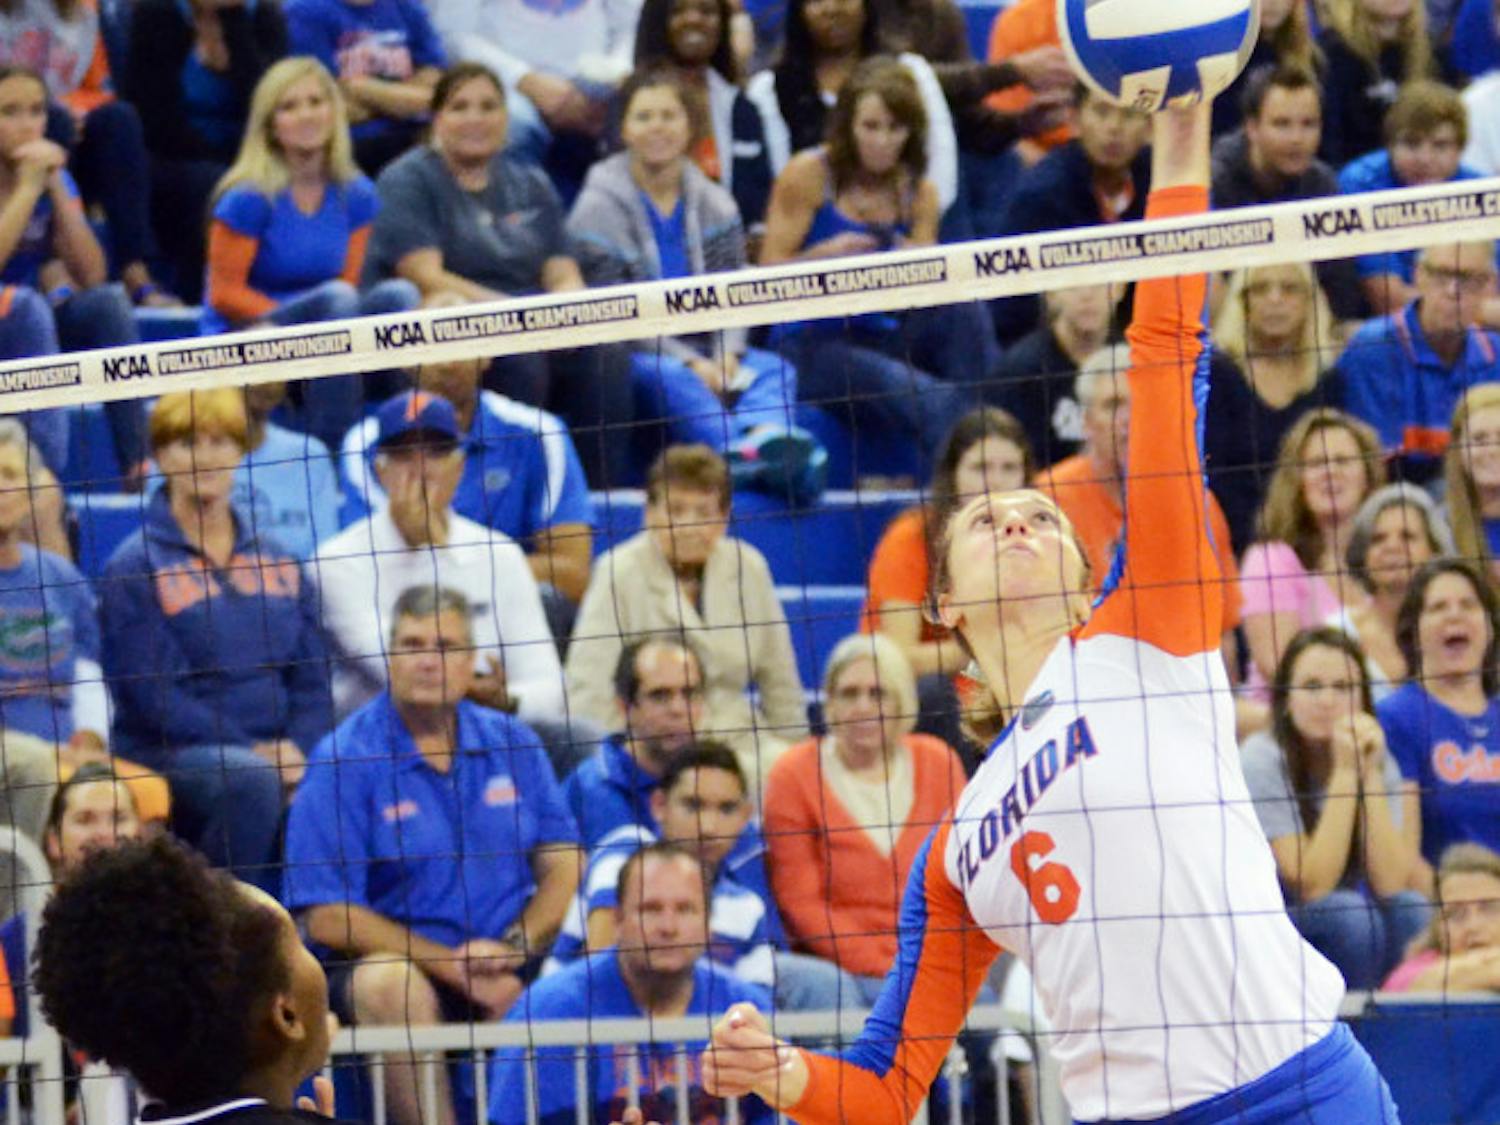 Mackenzie Dagostino swings for a kill attempt during Florida's 3-0 win against Alabama State in the first round of the NCAA Tournament on Friday in the O'Connell Center.